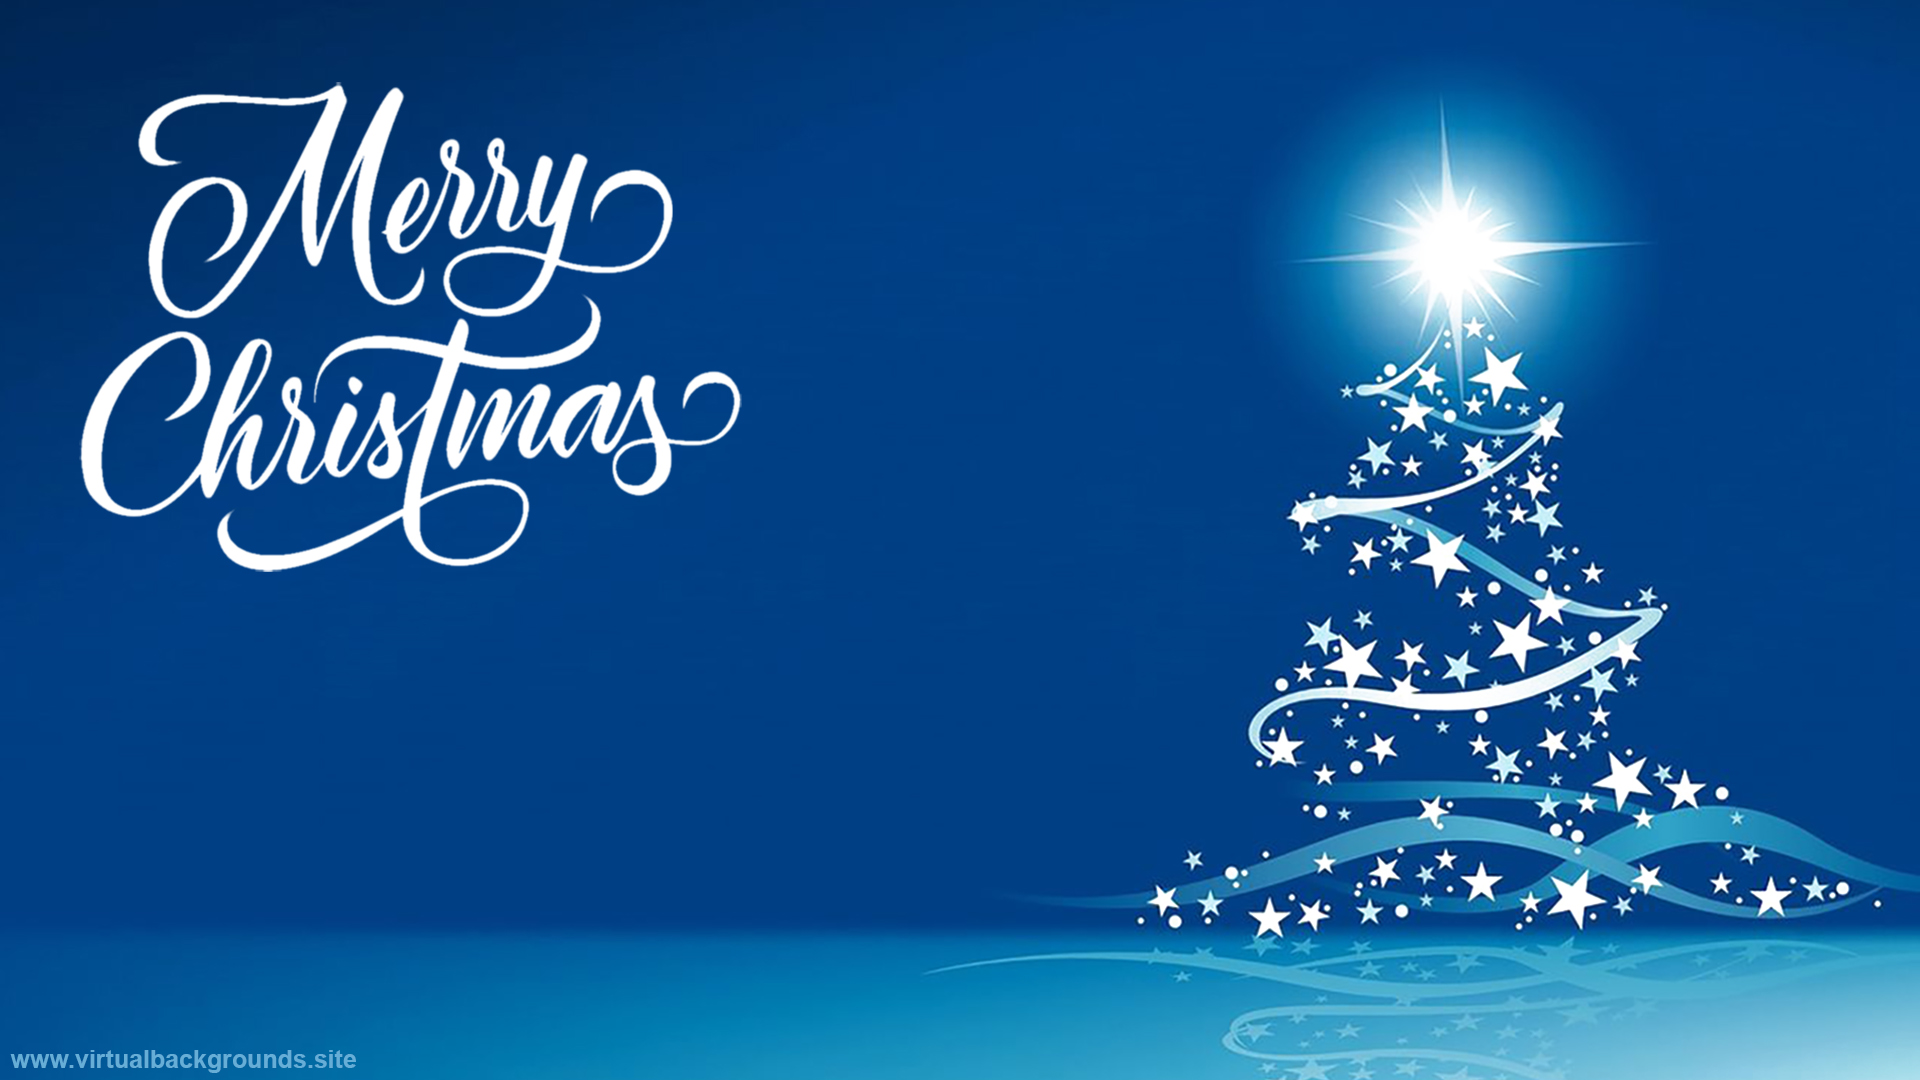 Merry Christmas in blue - Virtual Backgrounds